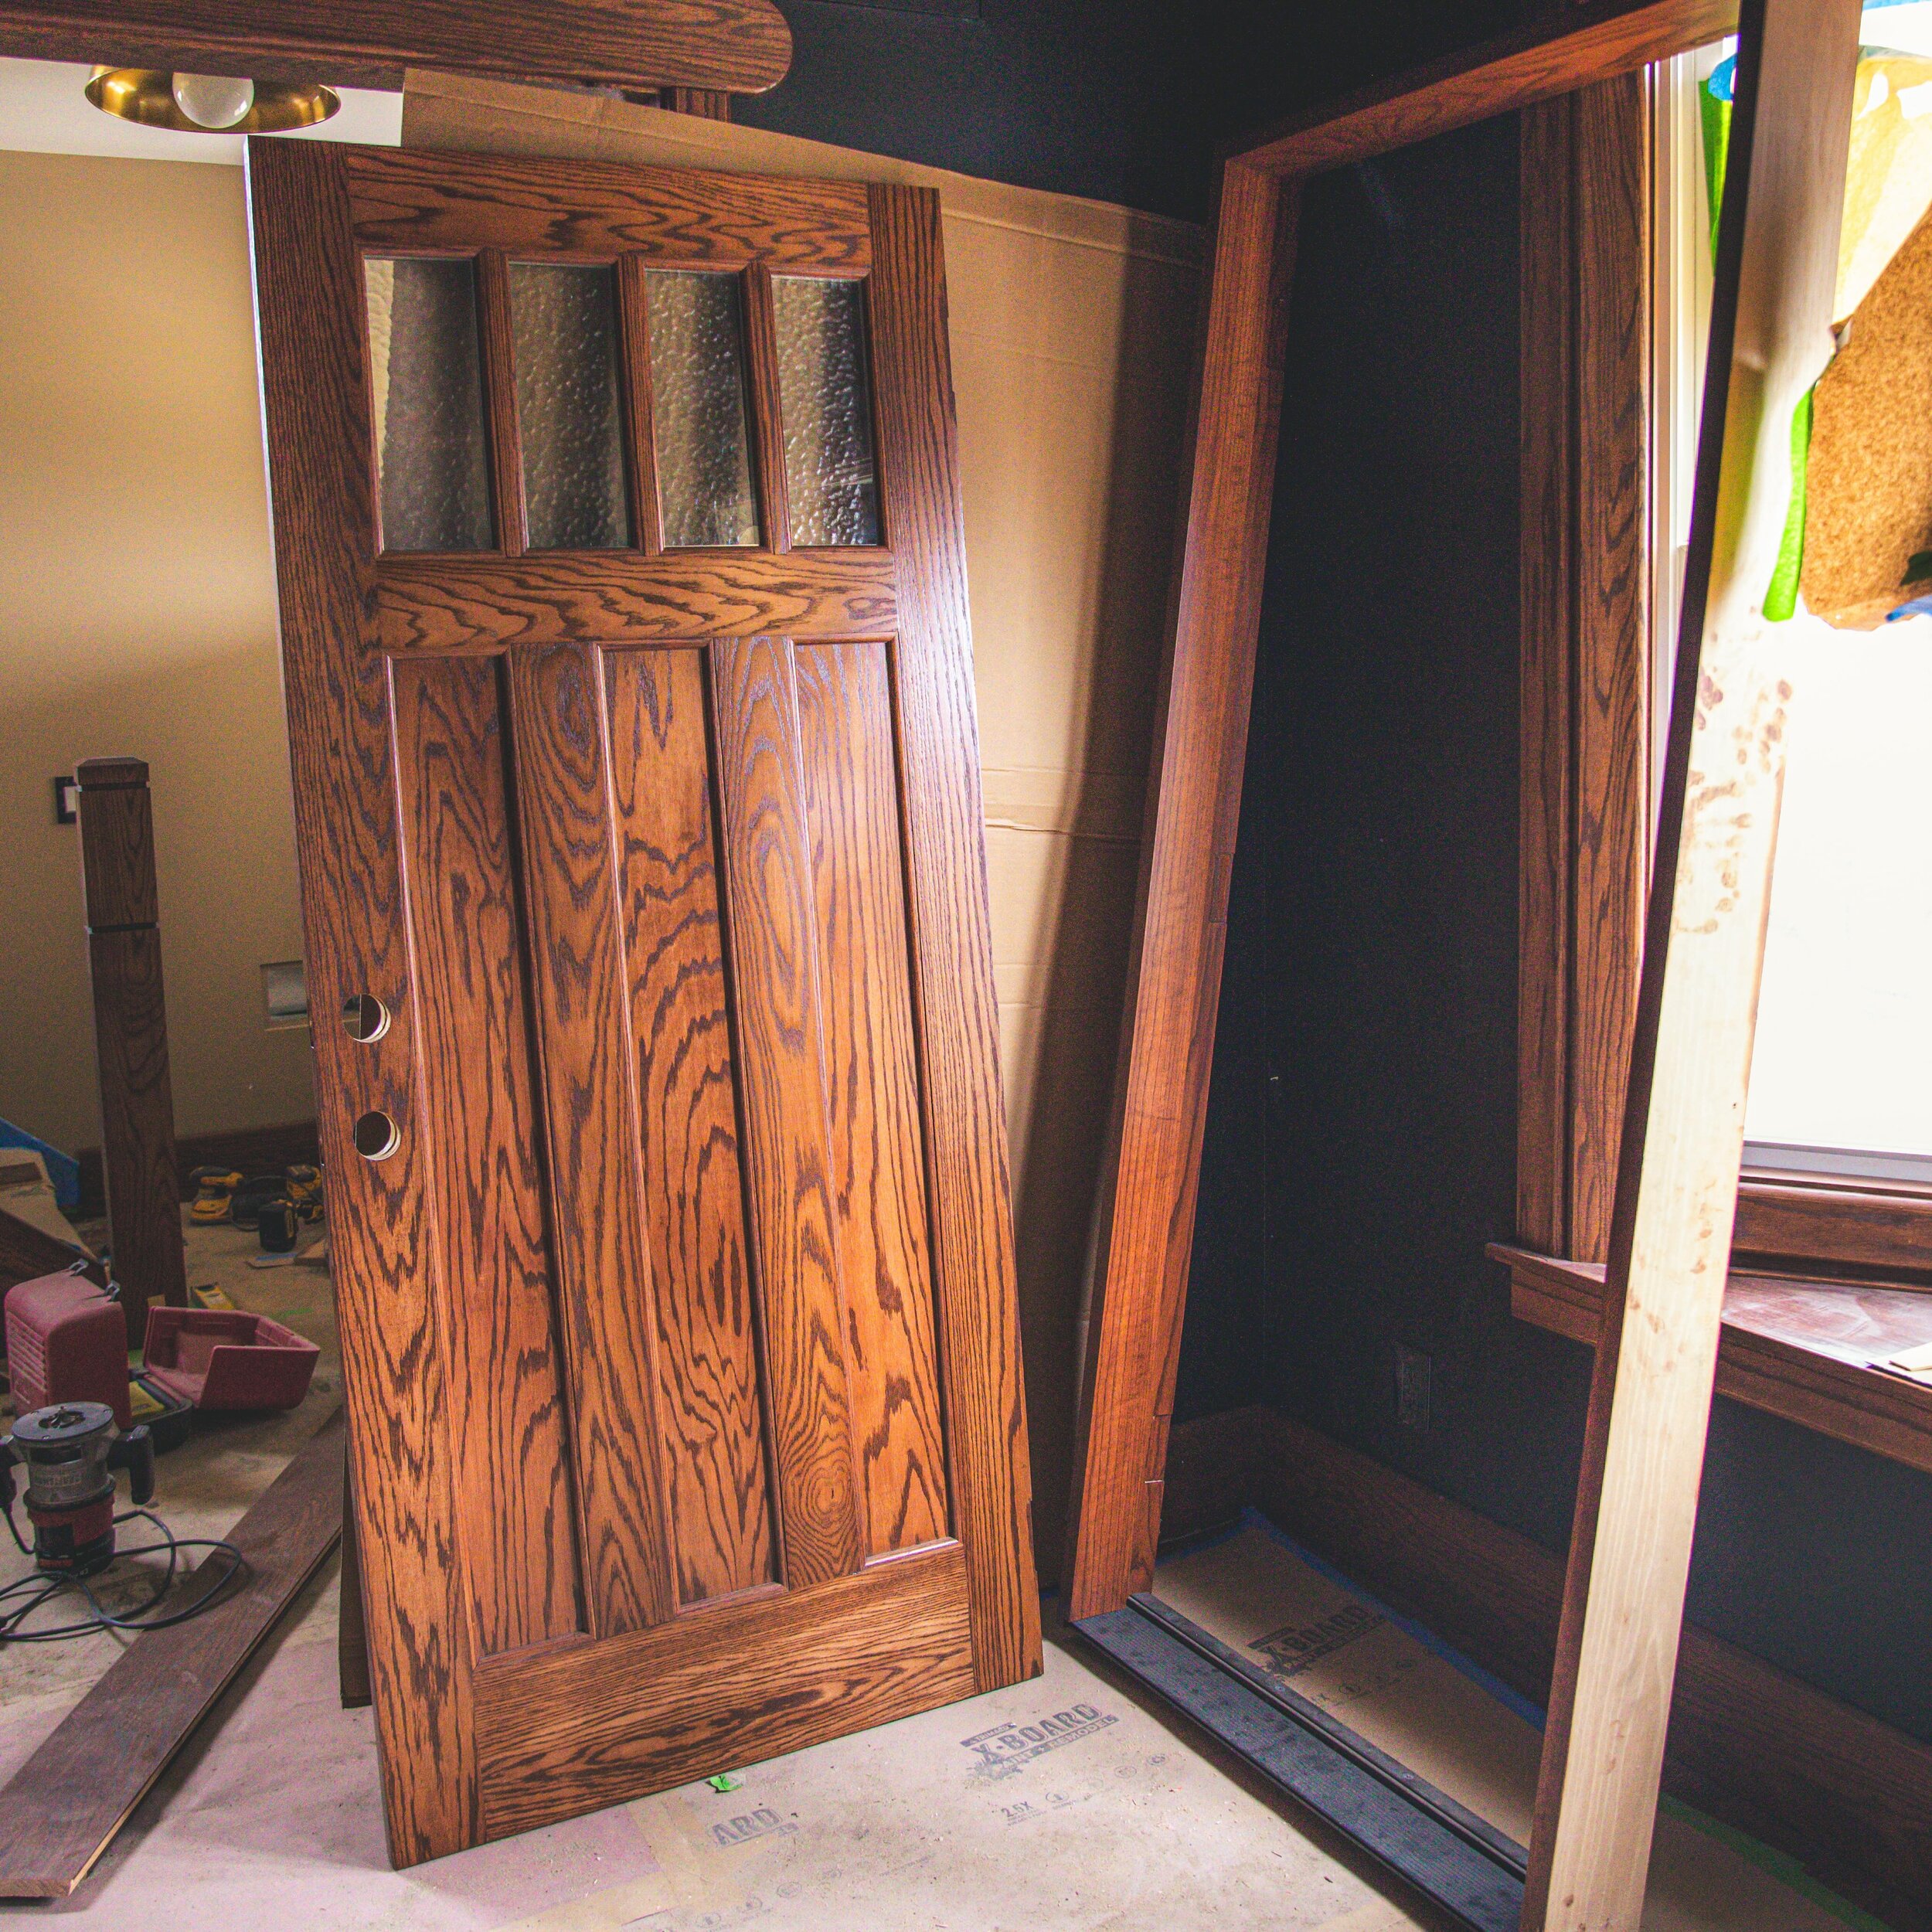 There is nothing better than a solid wood front door! 
.
.
.
#oak #wood #frontdoor #rehab #community #detroit #fullgut #midcenturymodern #nwgc #nwgoldbergcares